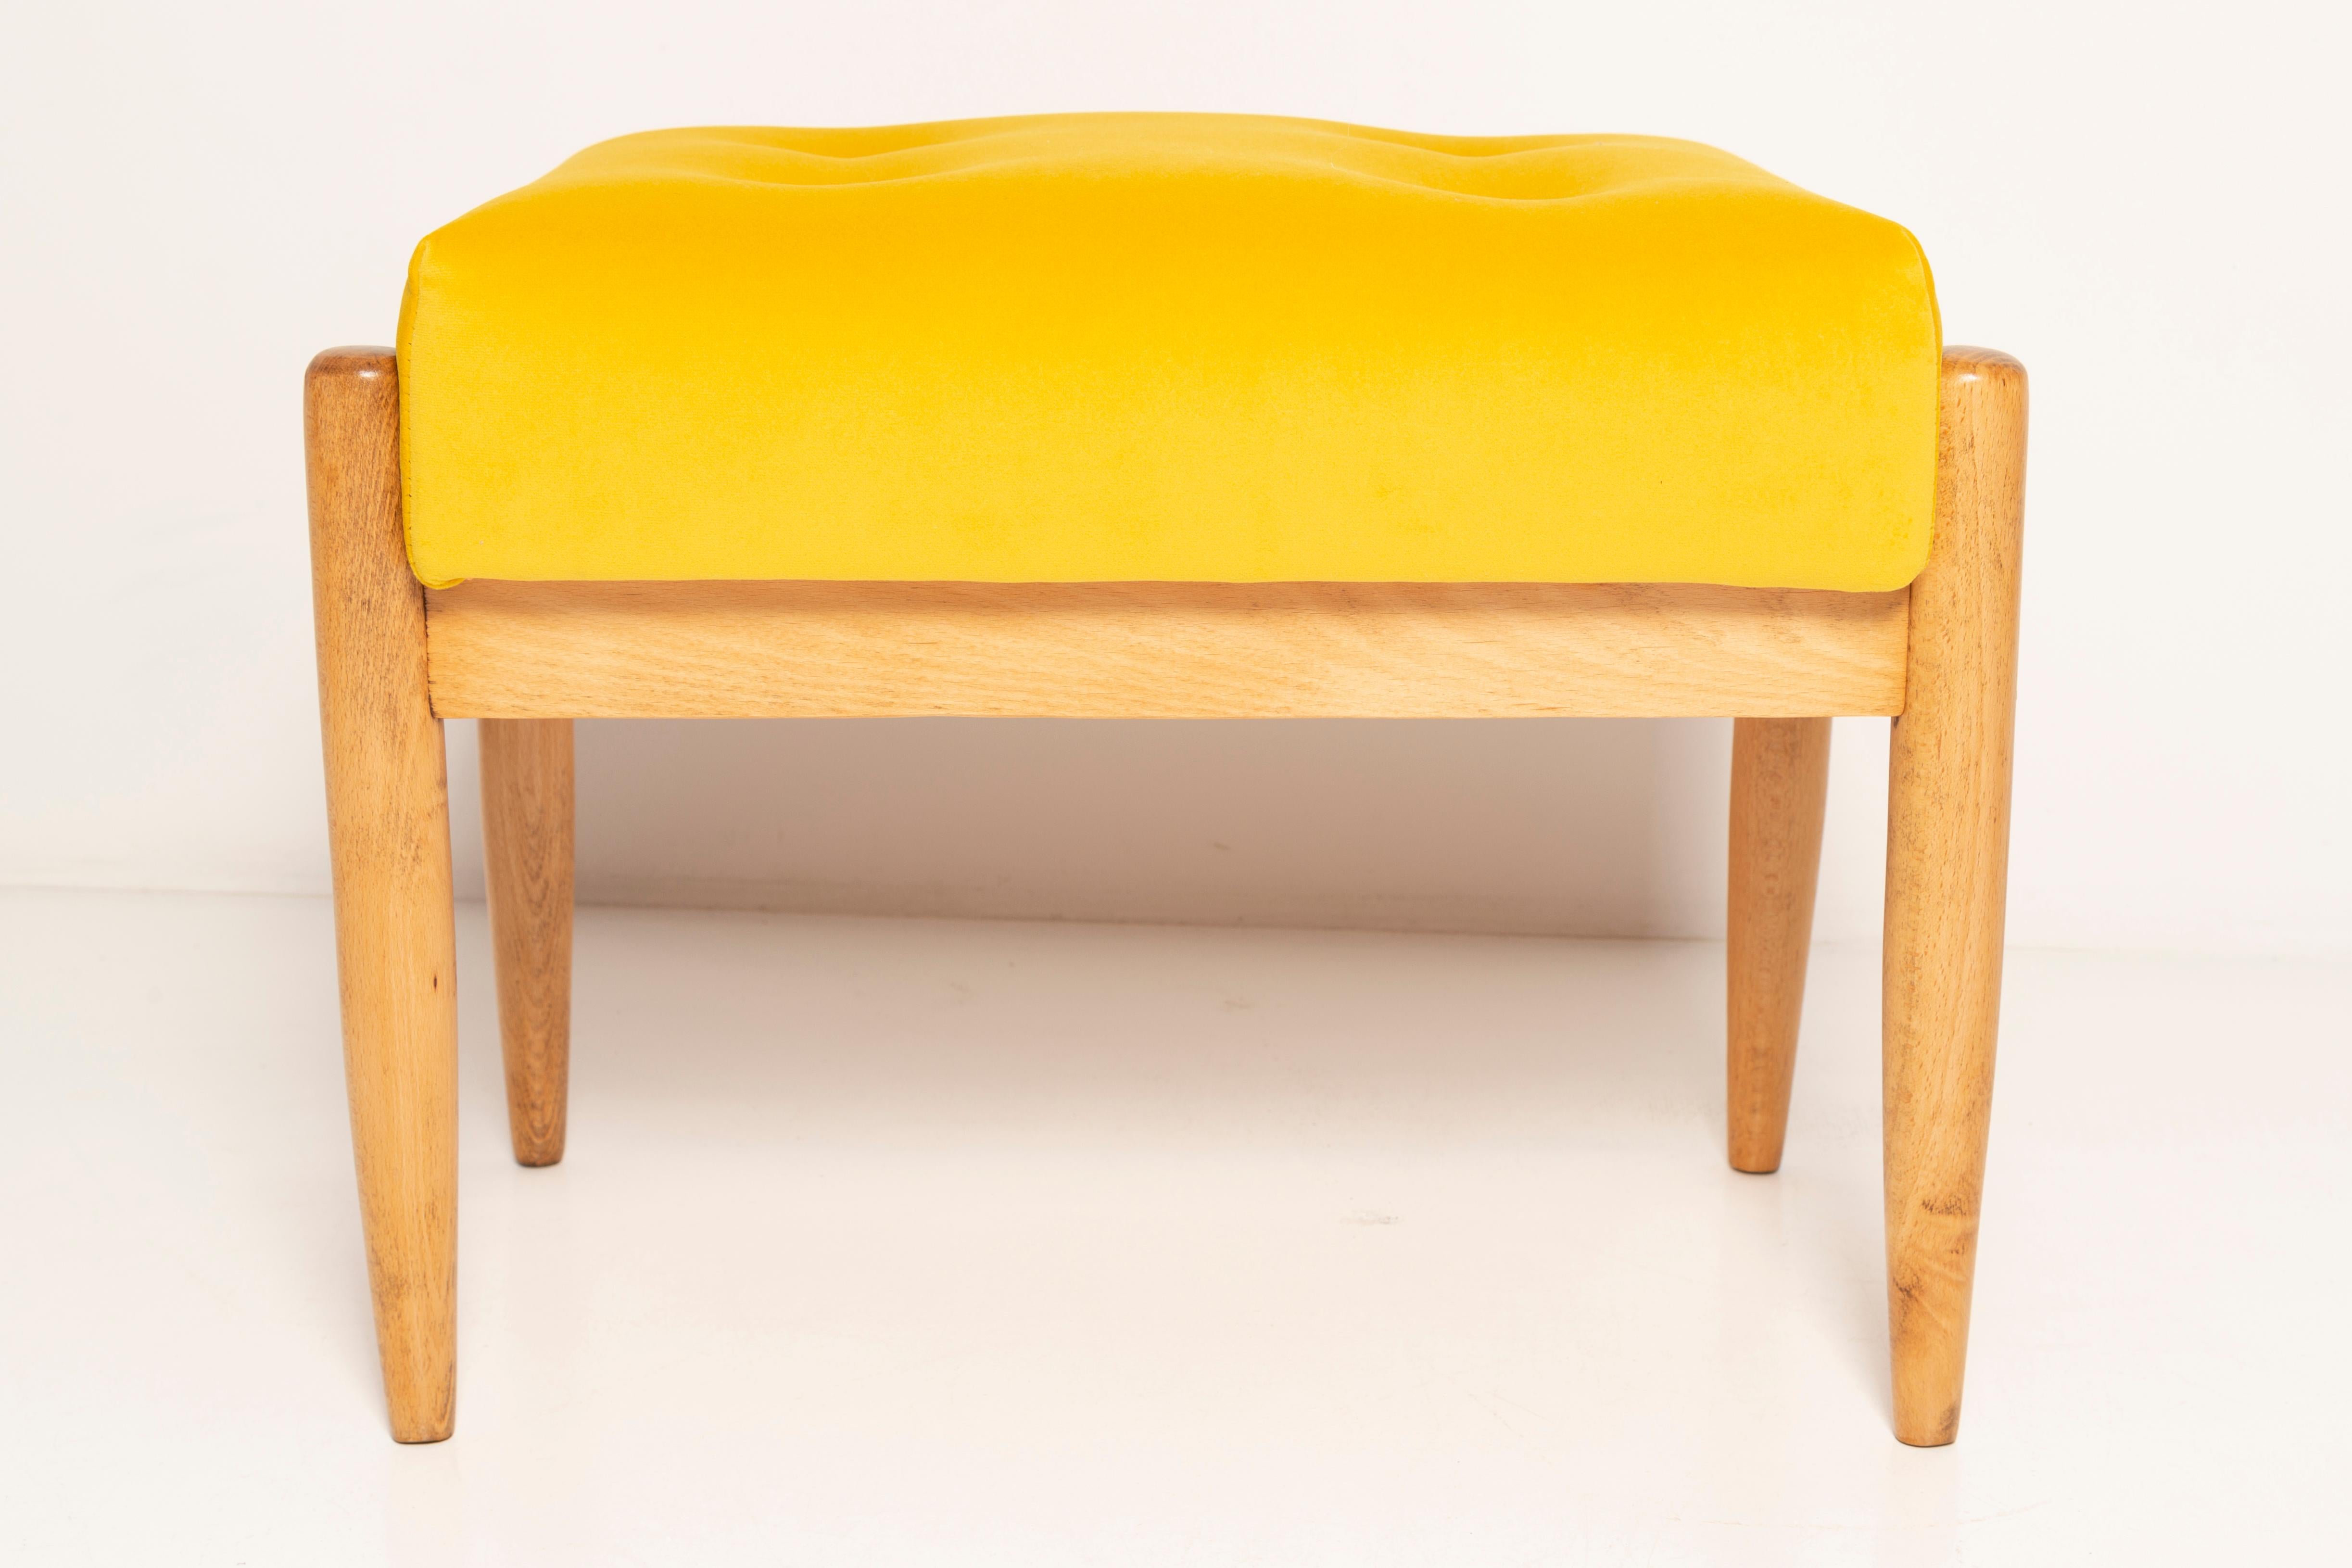 Set of Two Mid Century Mustard Yellow Vintage Stools, Edmund Homa, 1960s For Sale 1